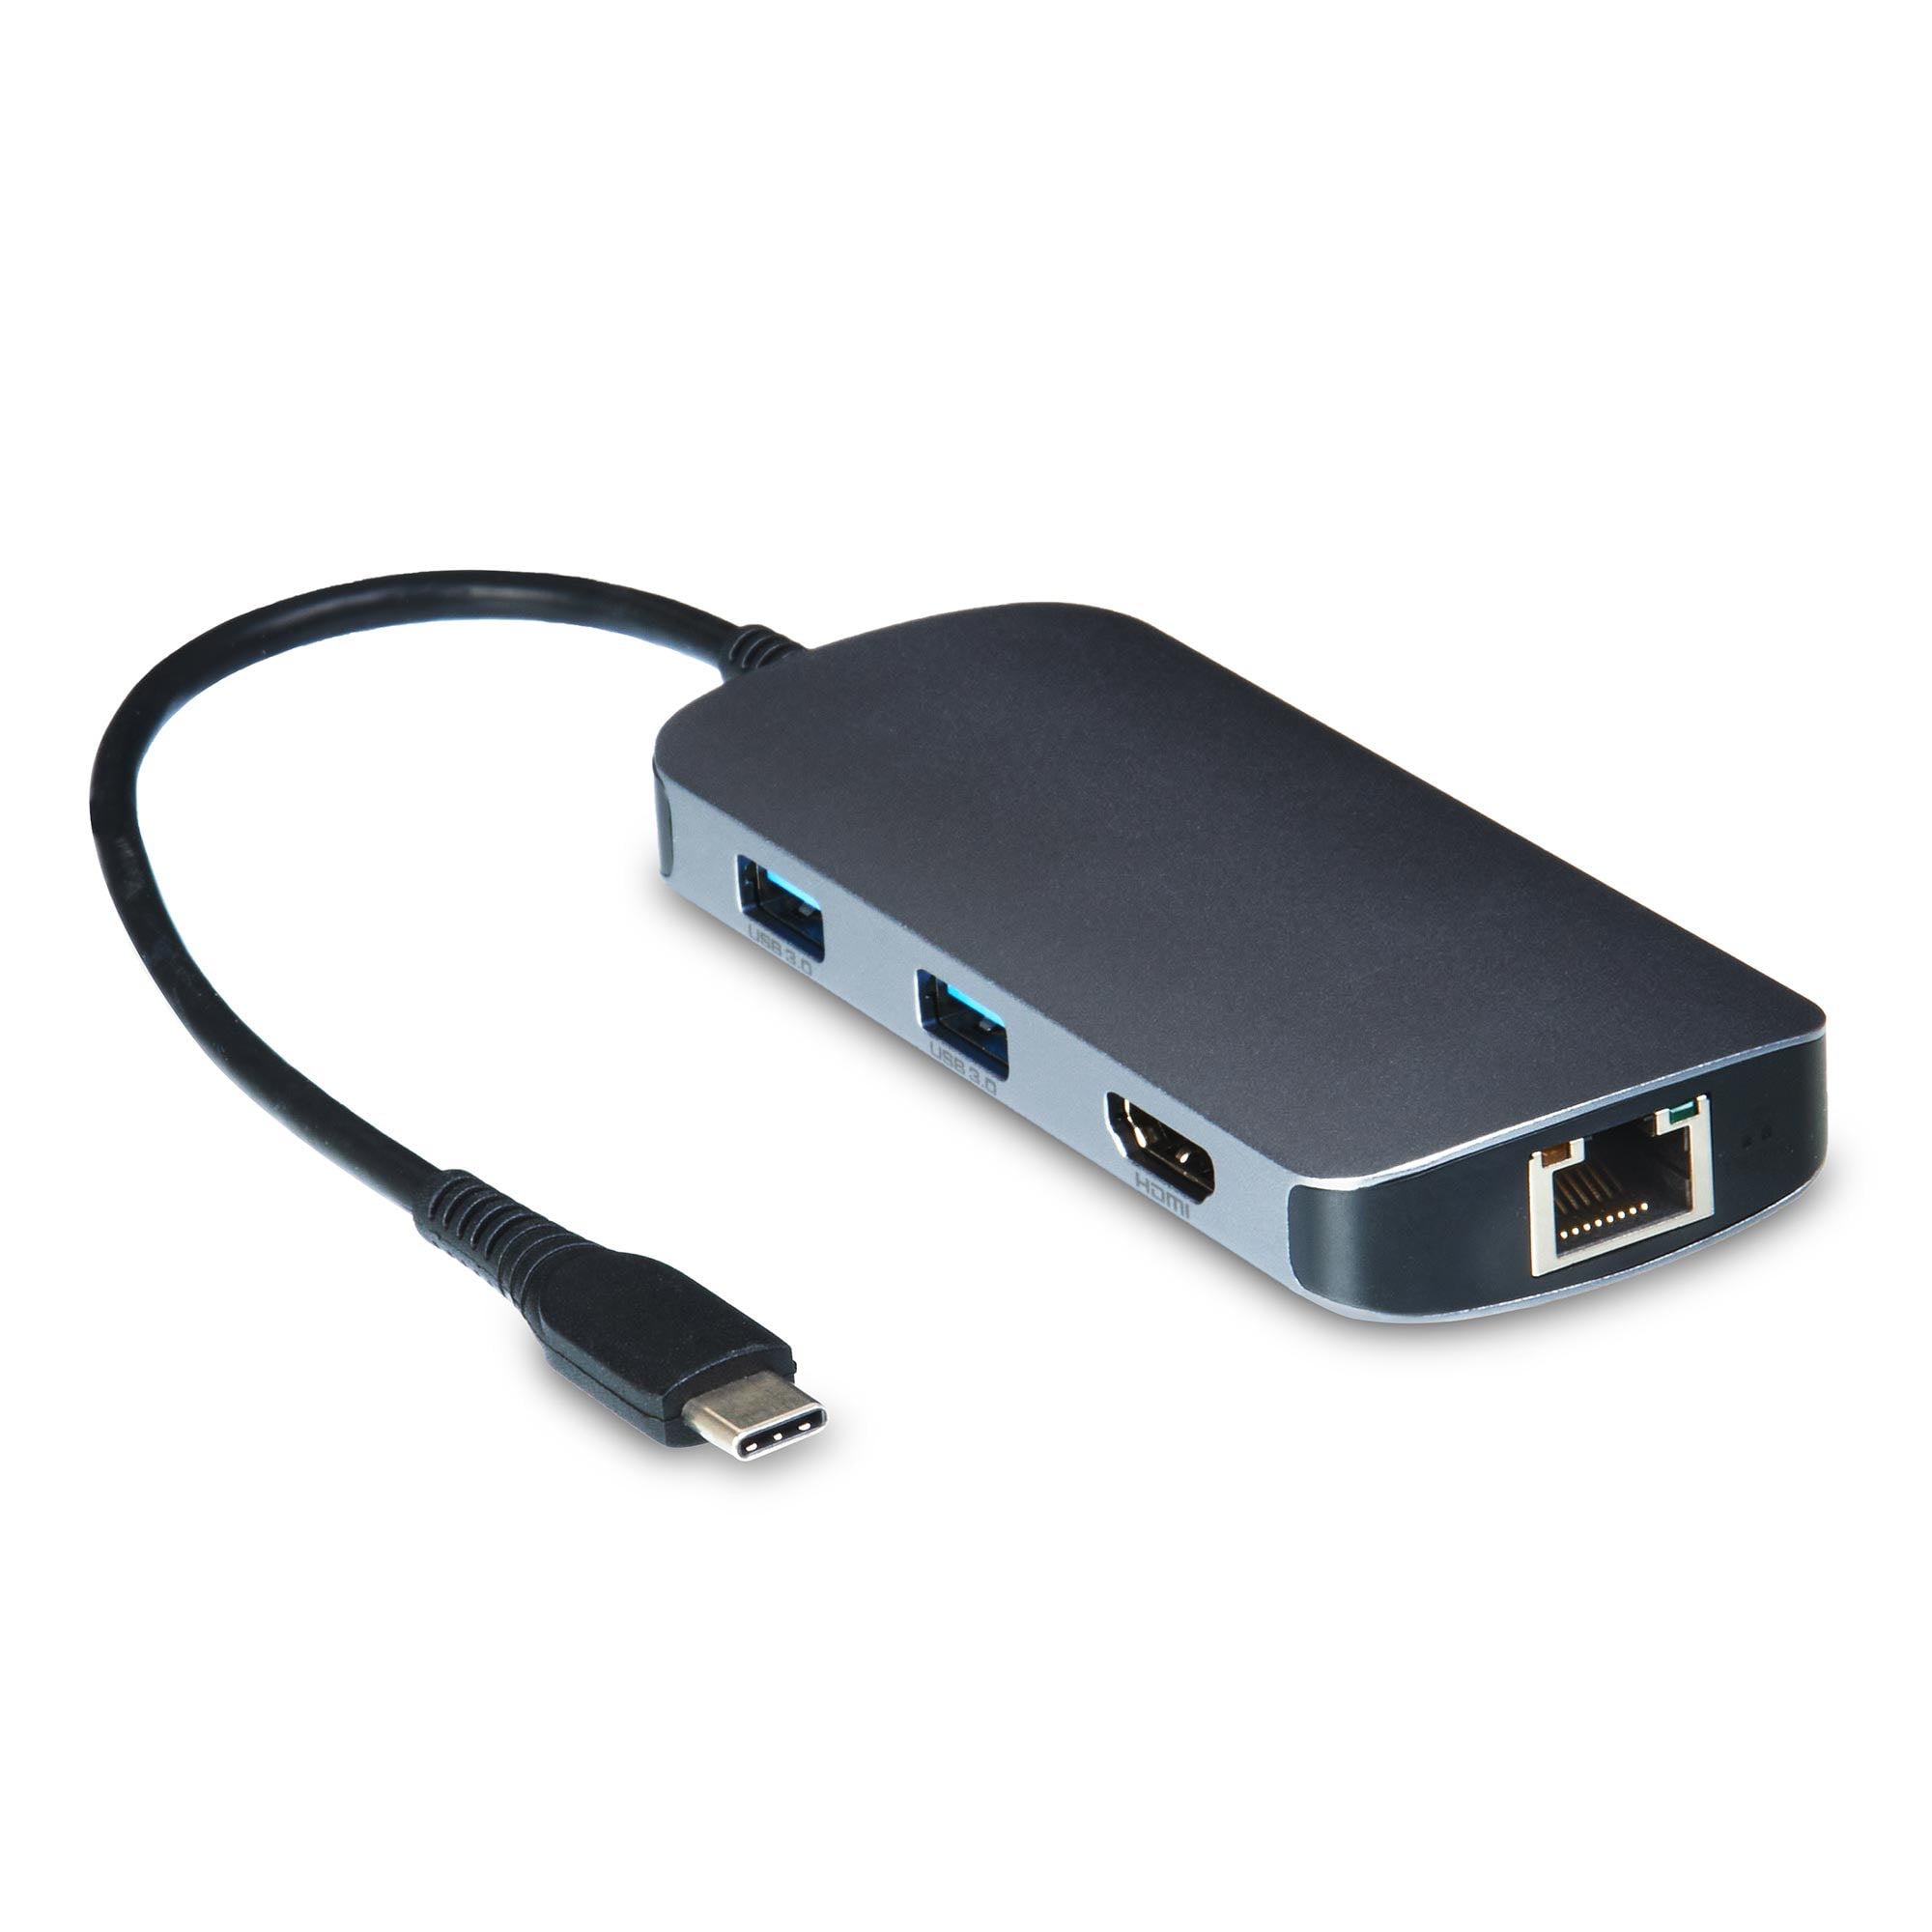 onn. 8-in-1 USB-C Adapter, USB and 4K HDMI Compatible - Walmart.com